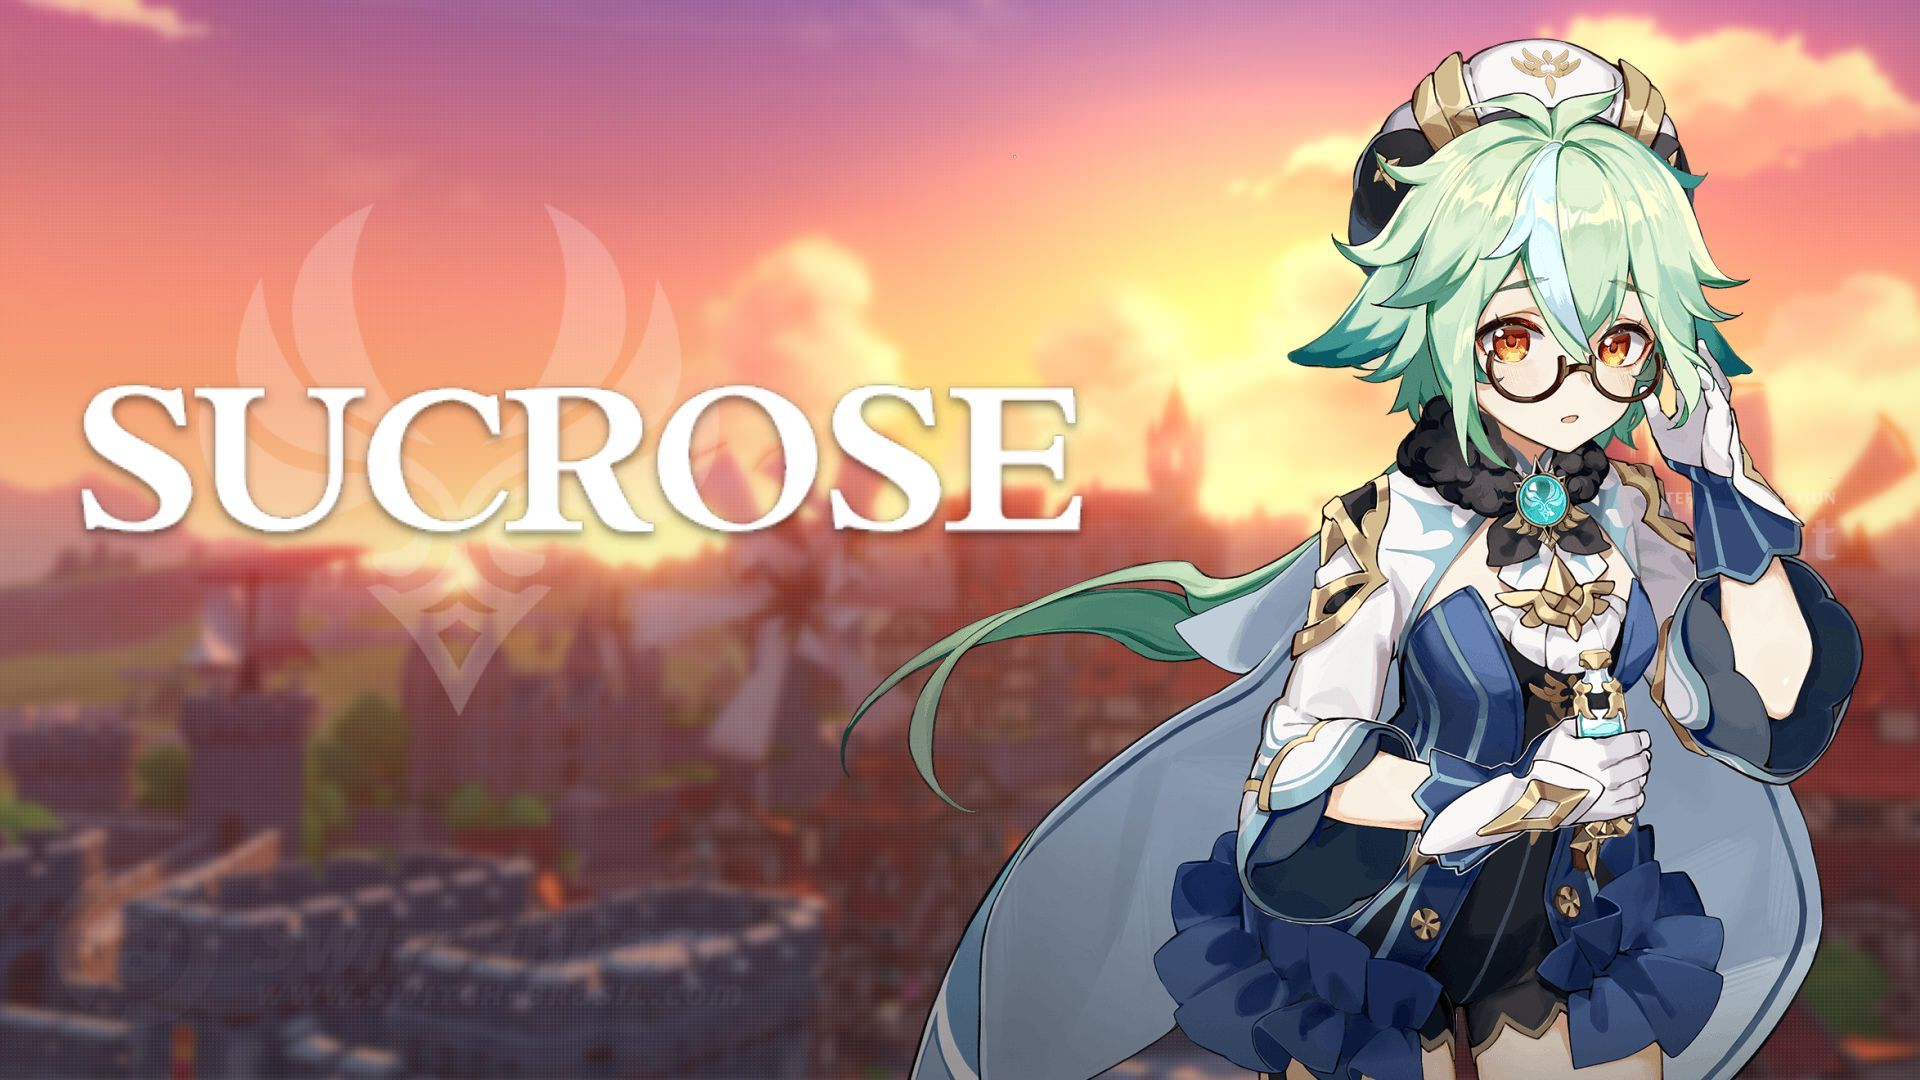 Sucrose appreciation. I haven't seen anyone give credit to sucrose for being top tier waifu material and a pretty good party member. I fell in love with her instantly and just wanted